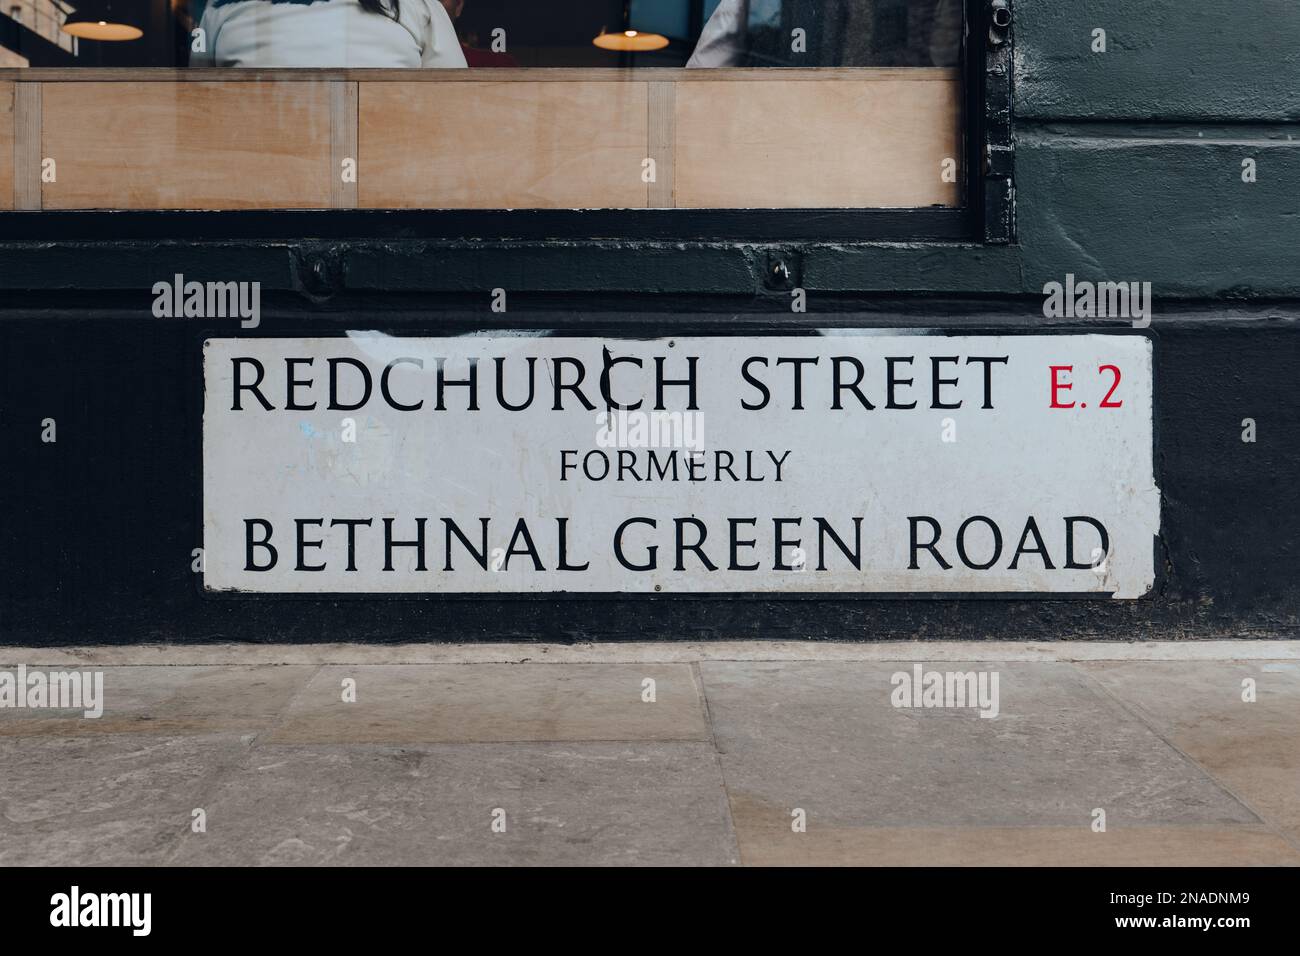 Street name sign on Redchurch Street (formerly Bethnal Green Road) in East London, UK. Stock Photo